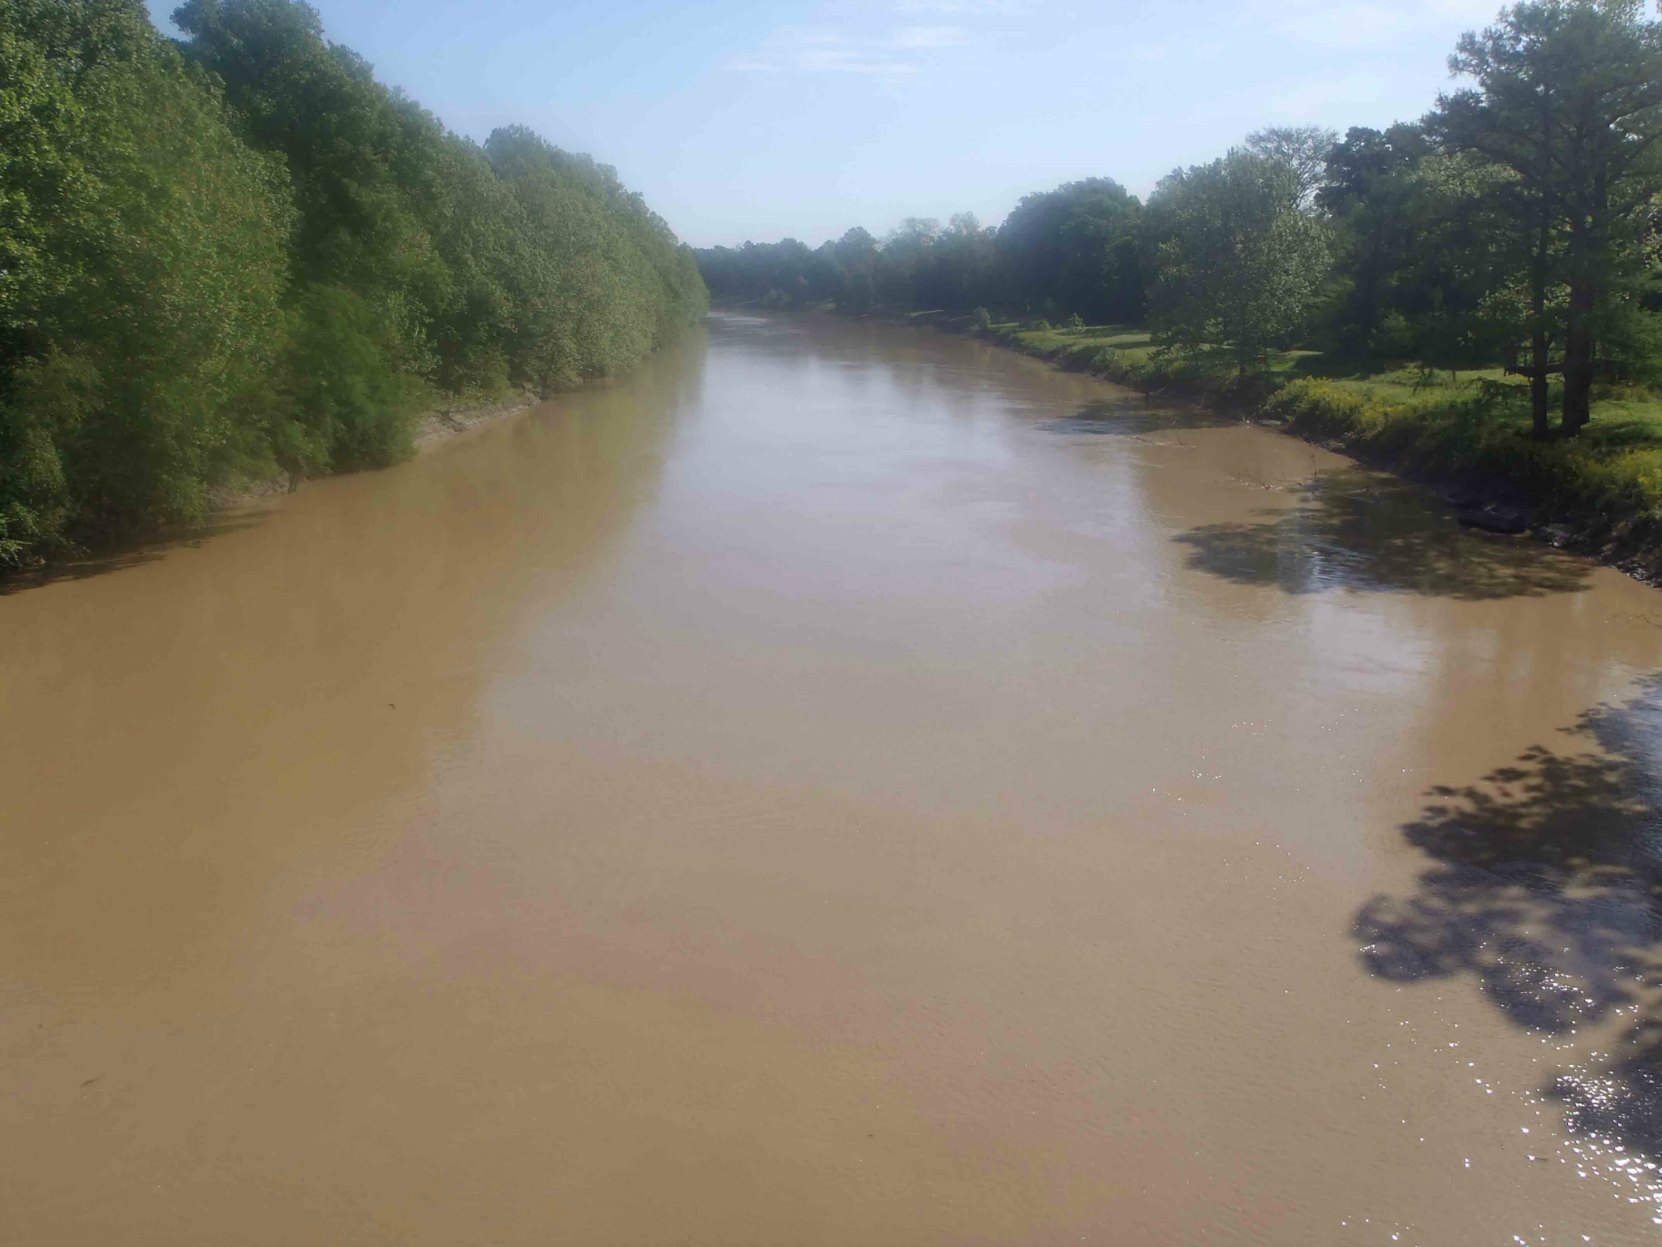 The Tallahatchee River, as seen from the "Tallahatchee Bridge" on Grand Avenue, Greenwood, Mississippi, near the Mississippi Country Music Trail marker for Bobbie Gentry